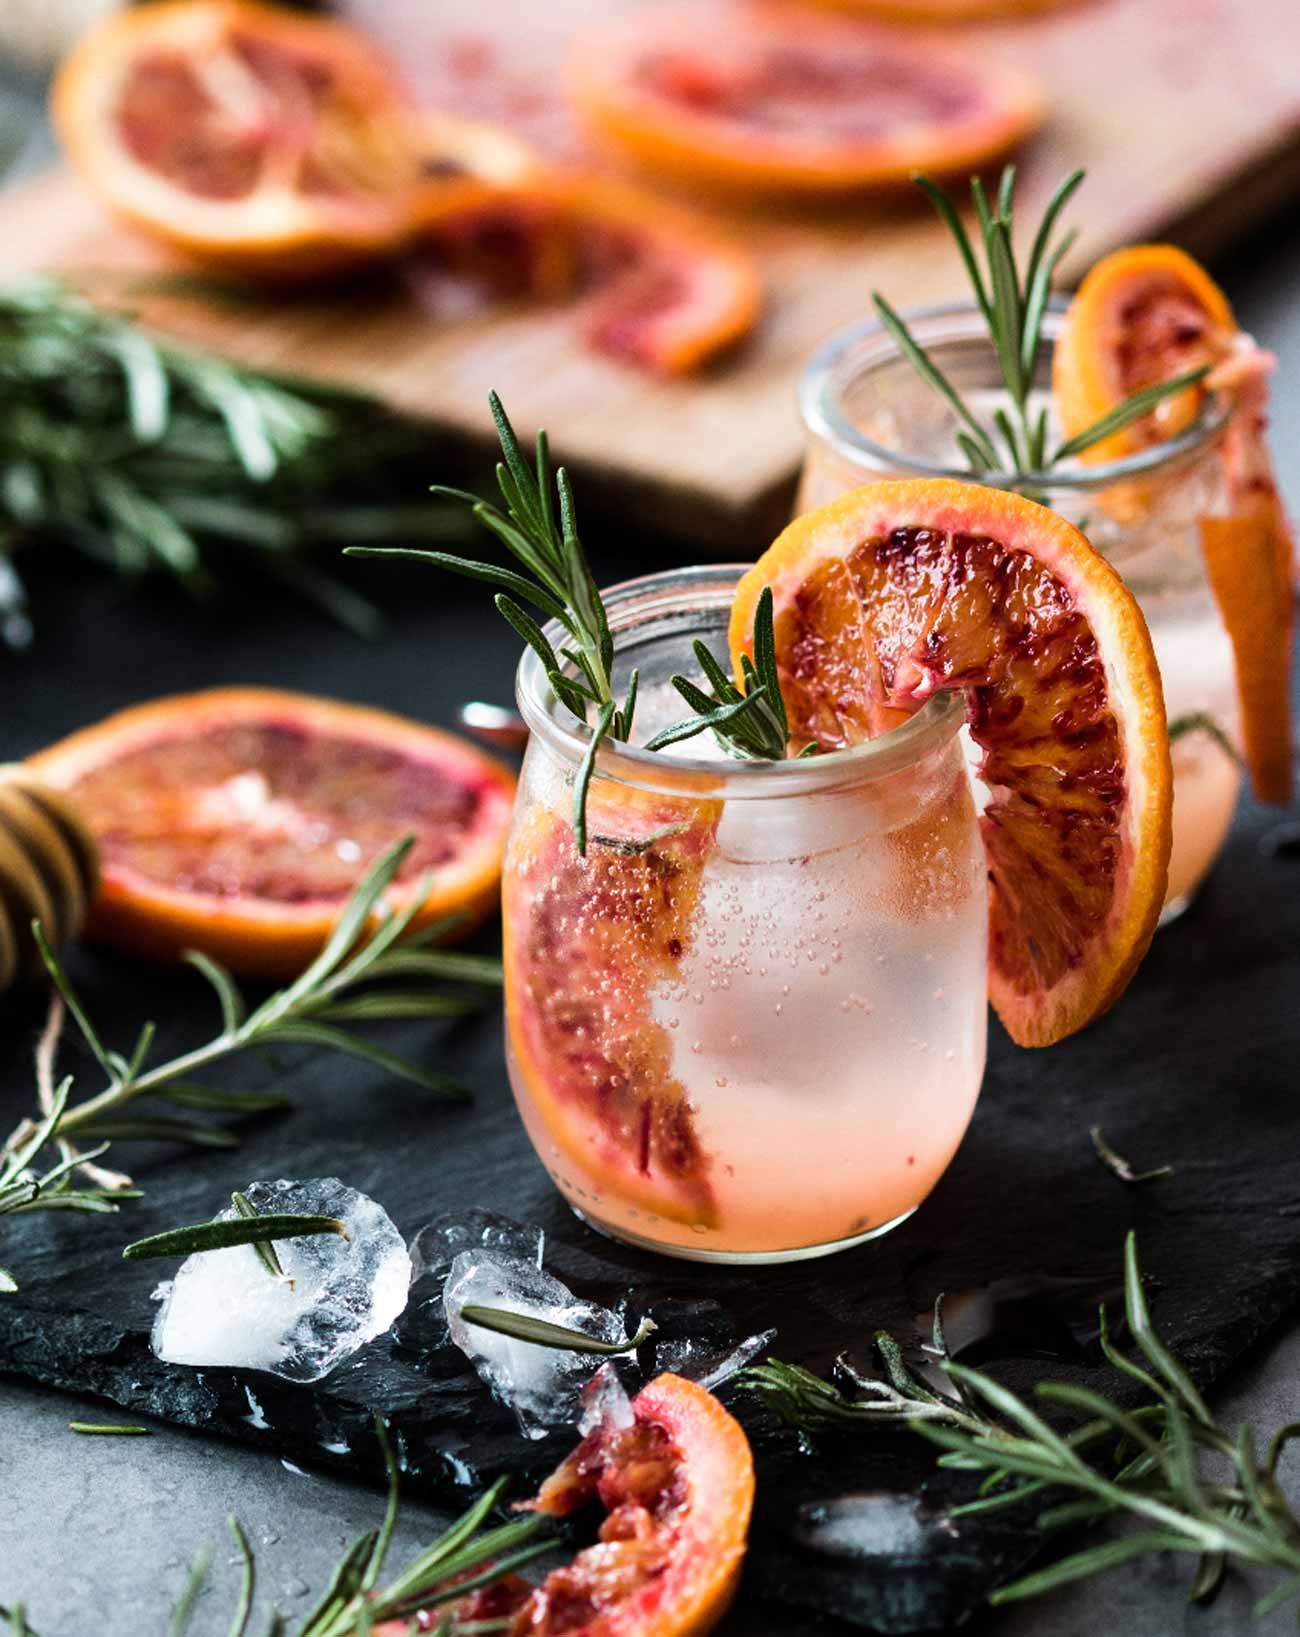 Unique old fashioned cocktail infused with rosemary and muddled blood oranges. 